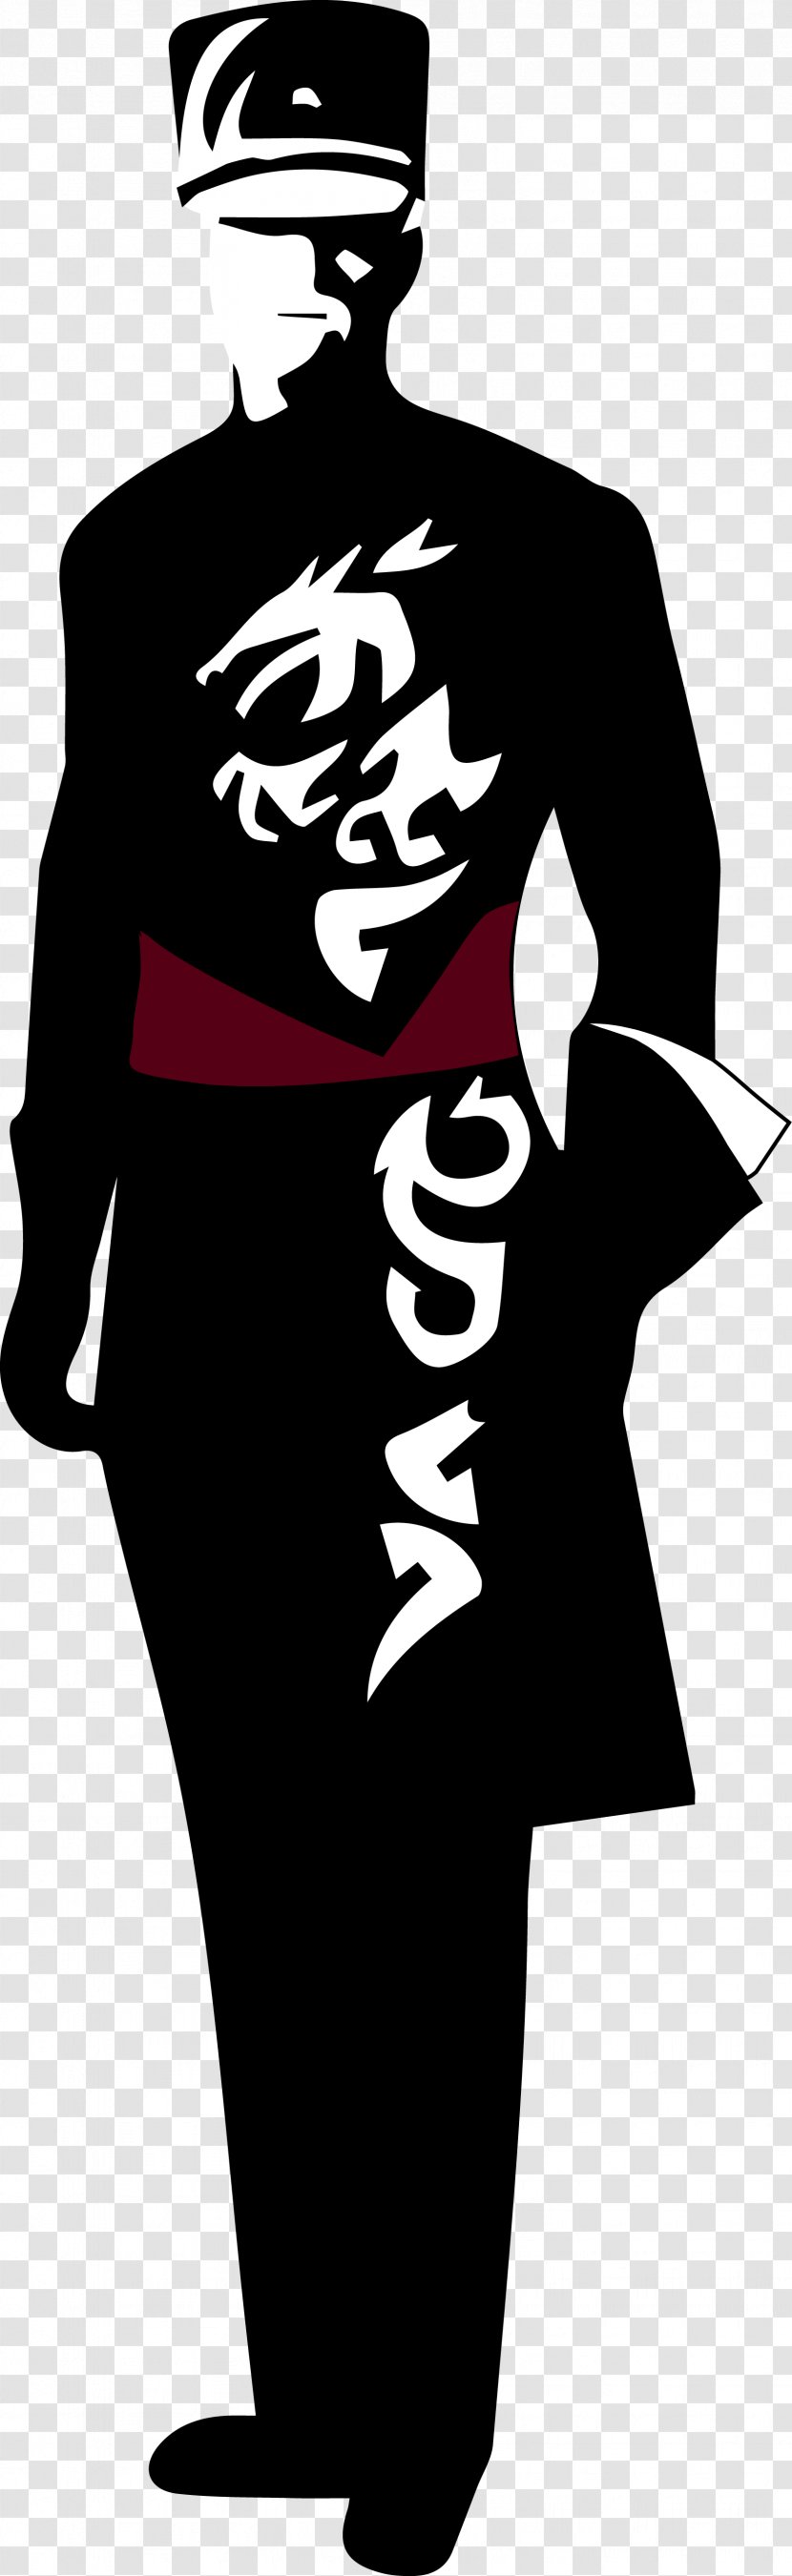 Round Rock High School Uniform Wikimedia Commons Marching Band Art Transparent PNG